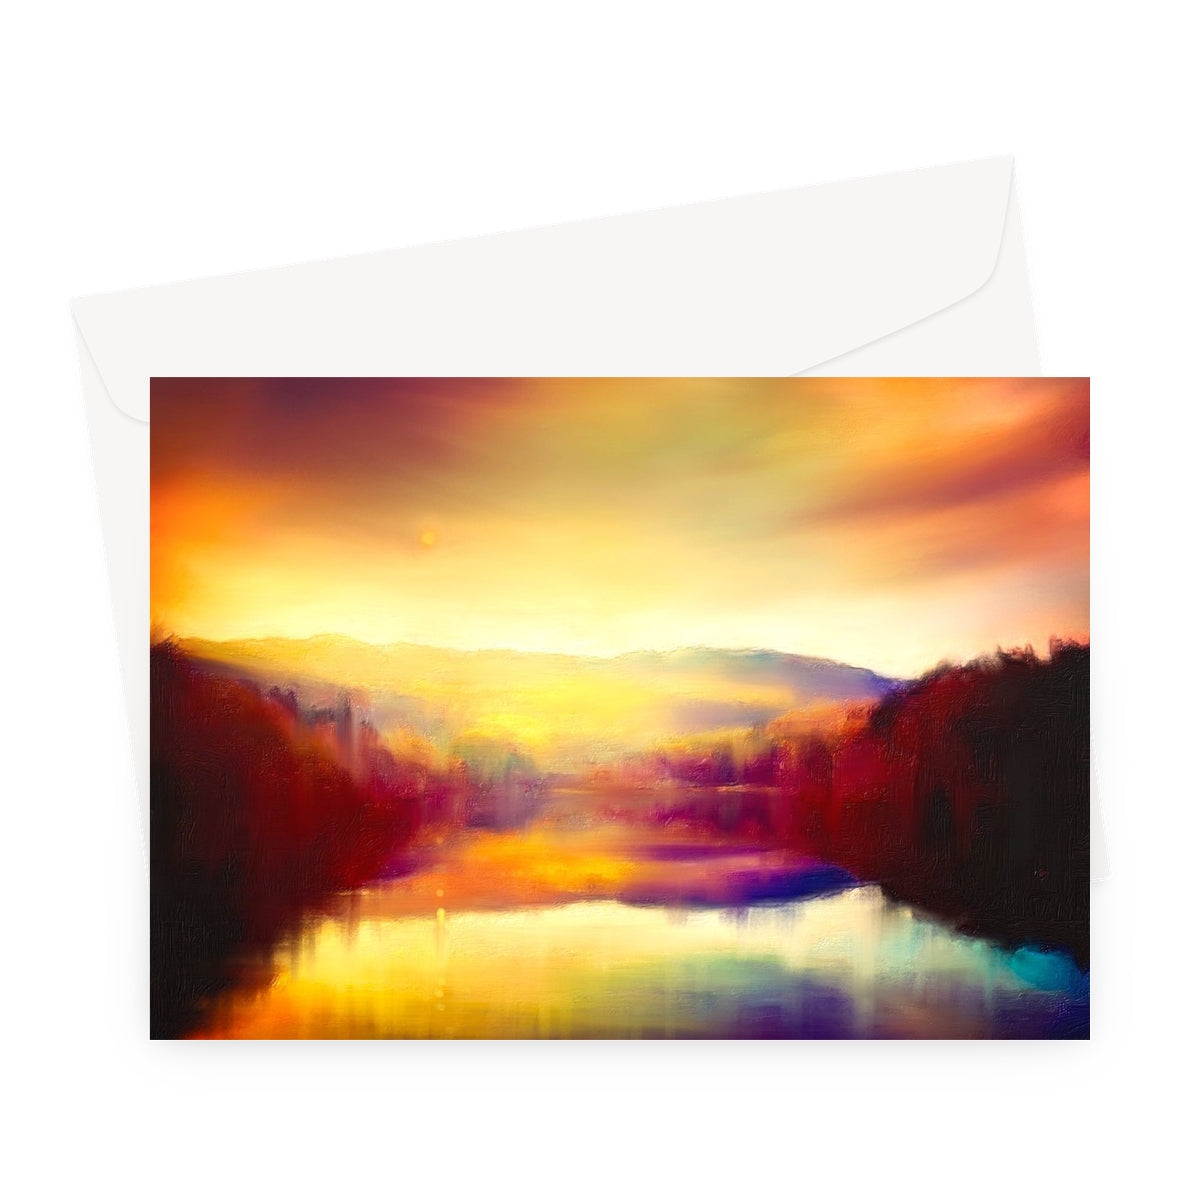 Loch Faskally Dusk Art Gifts Greeting Card-Greetings Cards-Scottish Lochs & Mountains Art Gallery-A5 Landscape-1 Card-Paintings, Prints, Homeware, Art Gifts From Scotland By Scottish Artist Kevin Hunter